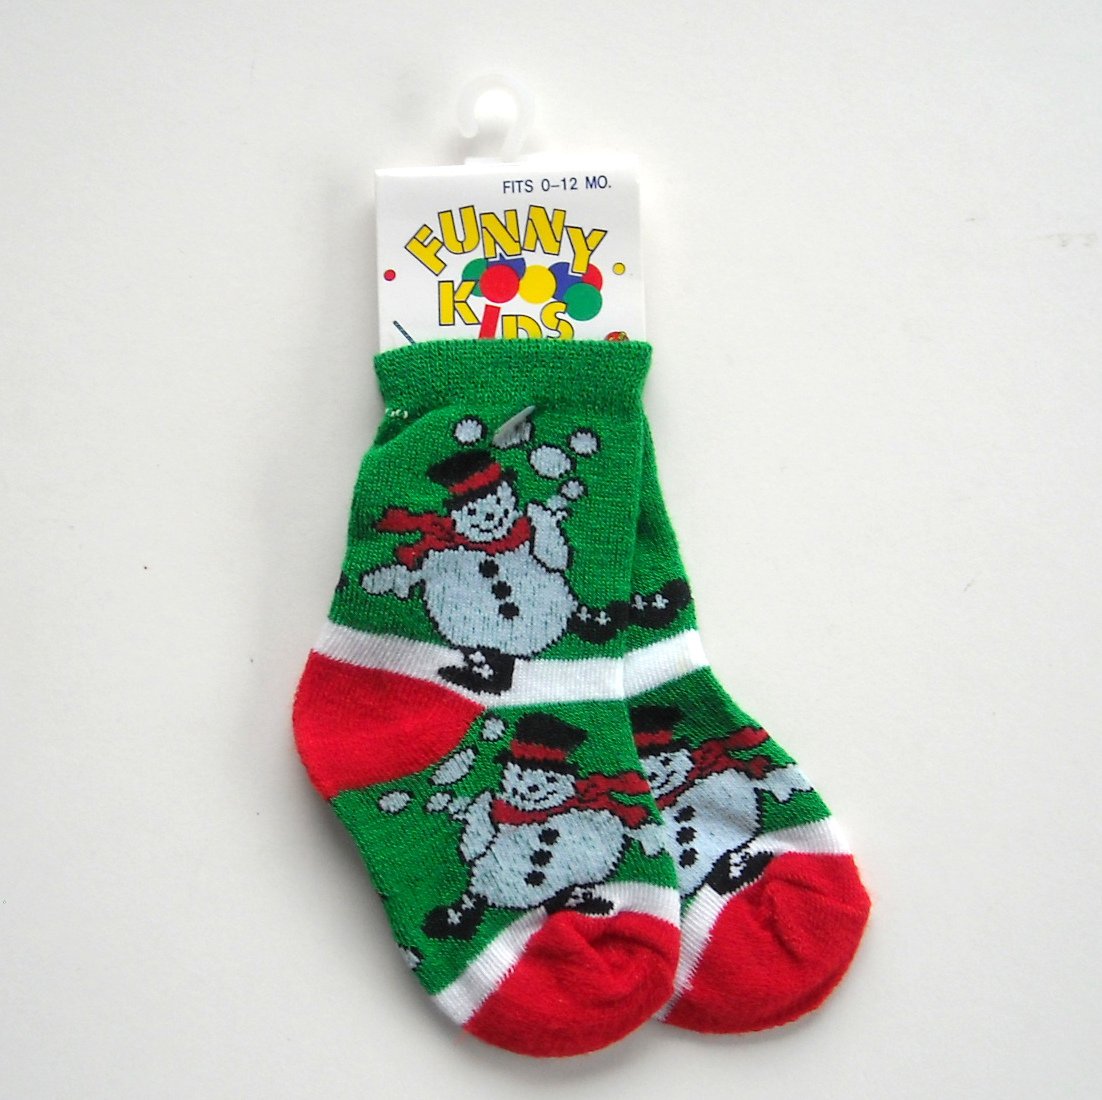 Funny Kids baby booties Snowman socks 0 - 12 month NWT